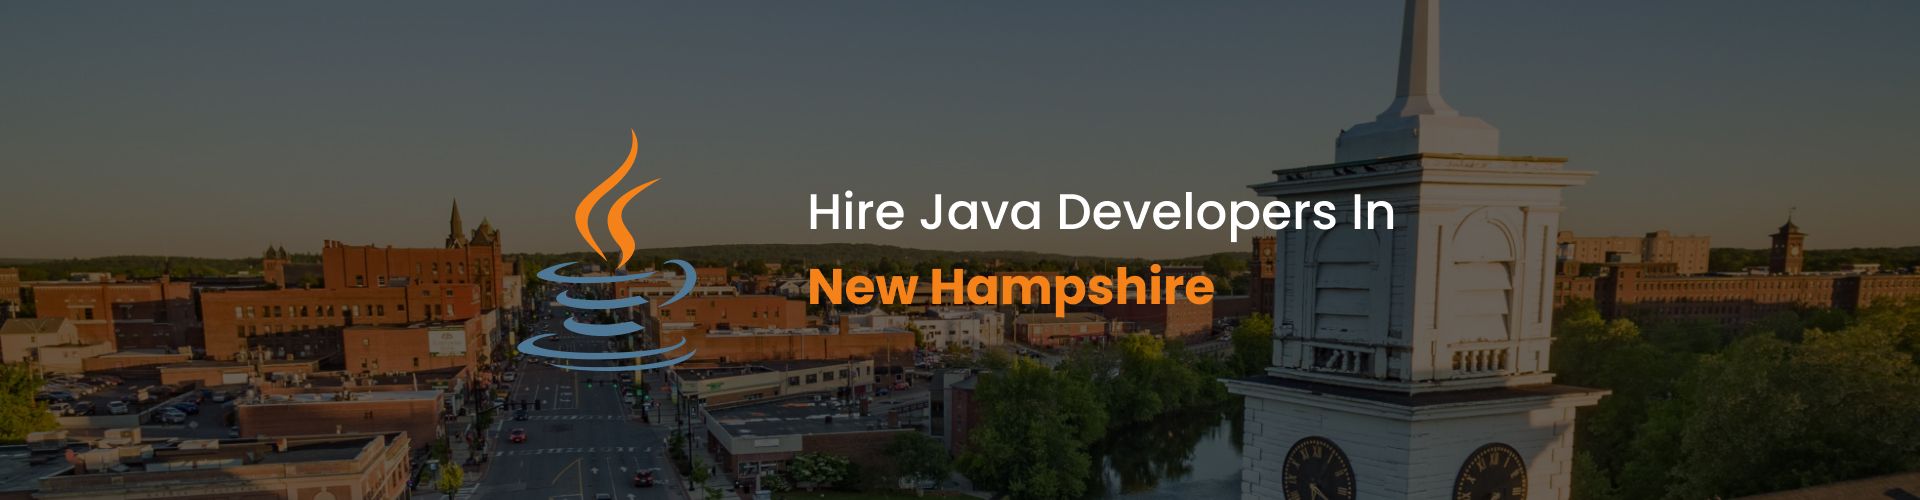 hire java developers in new hampshire